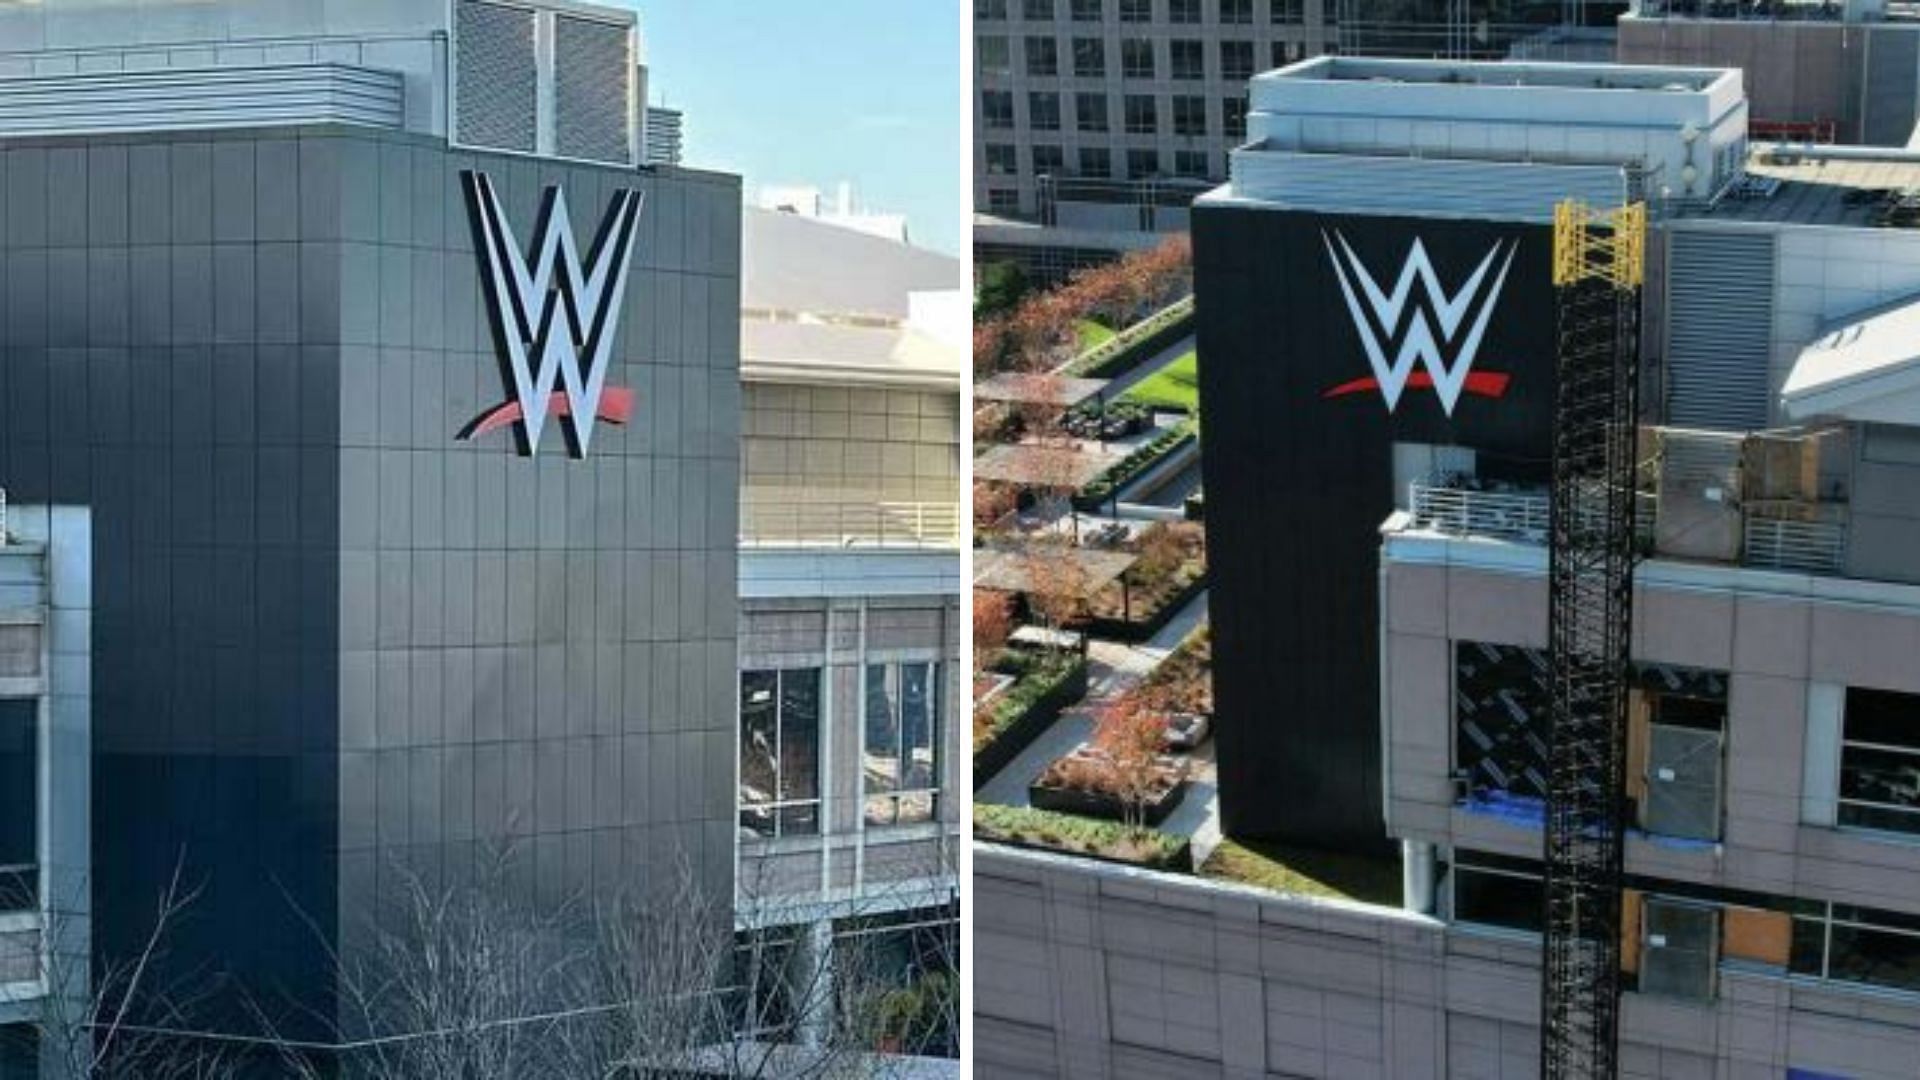 does wwe headquarters give tours